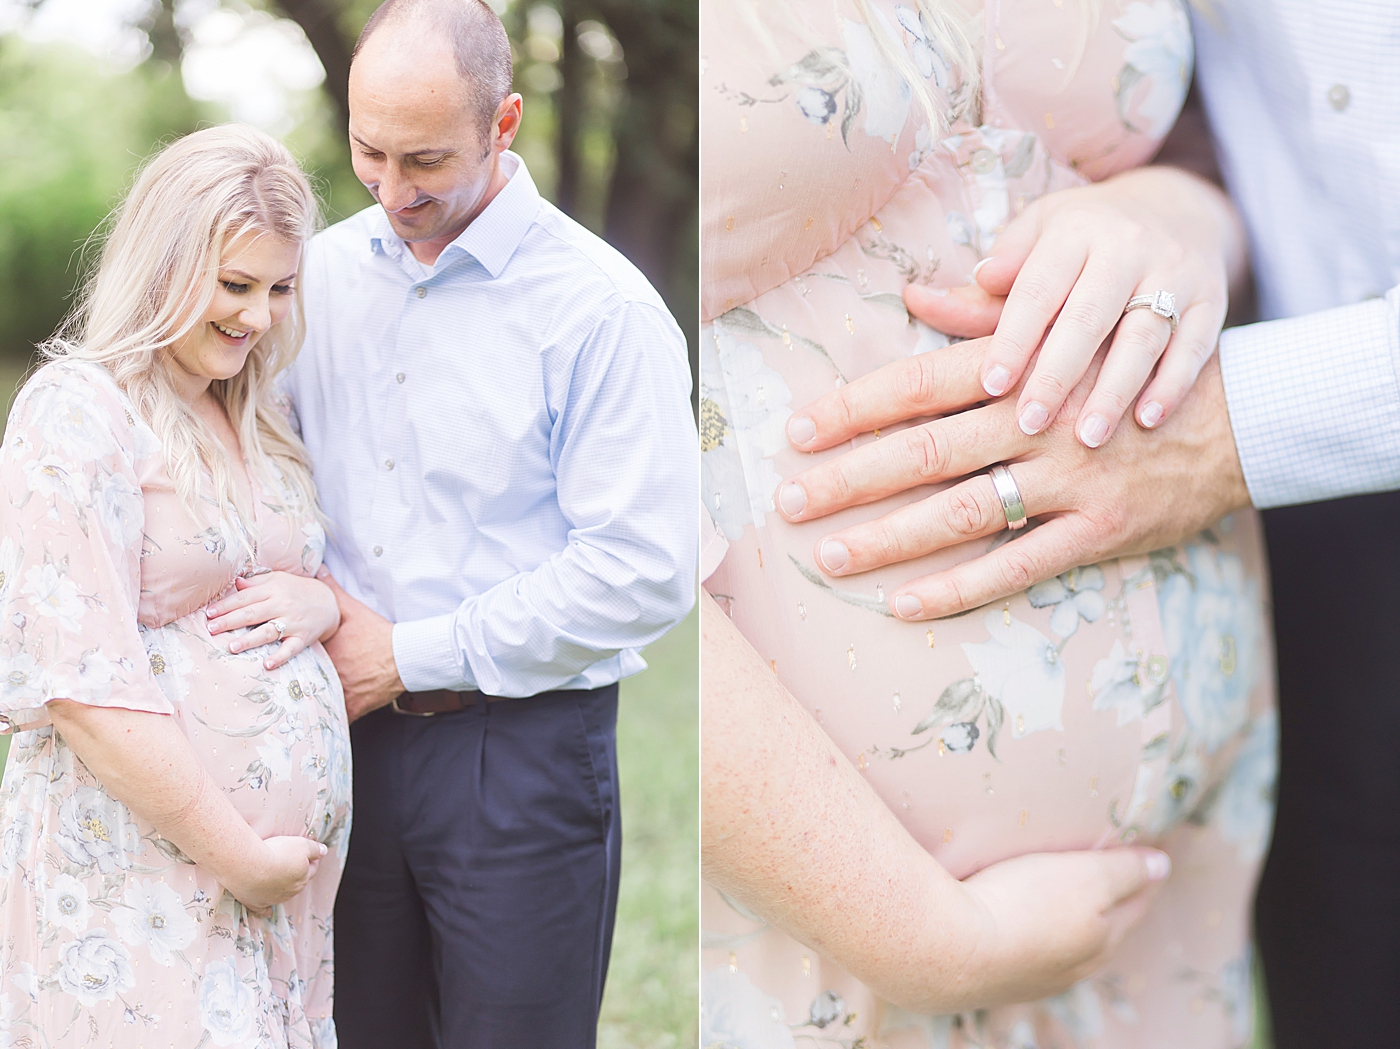 New parents celebrate pregnancy with maternity photoshoot. Photo by Fresh Light Photography.